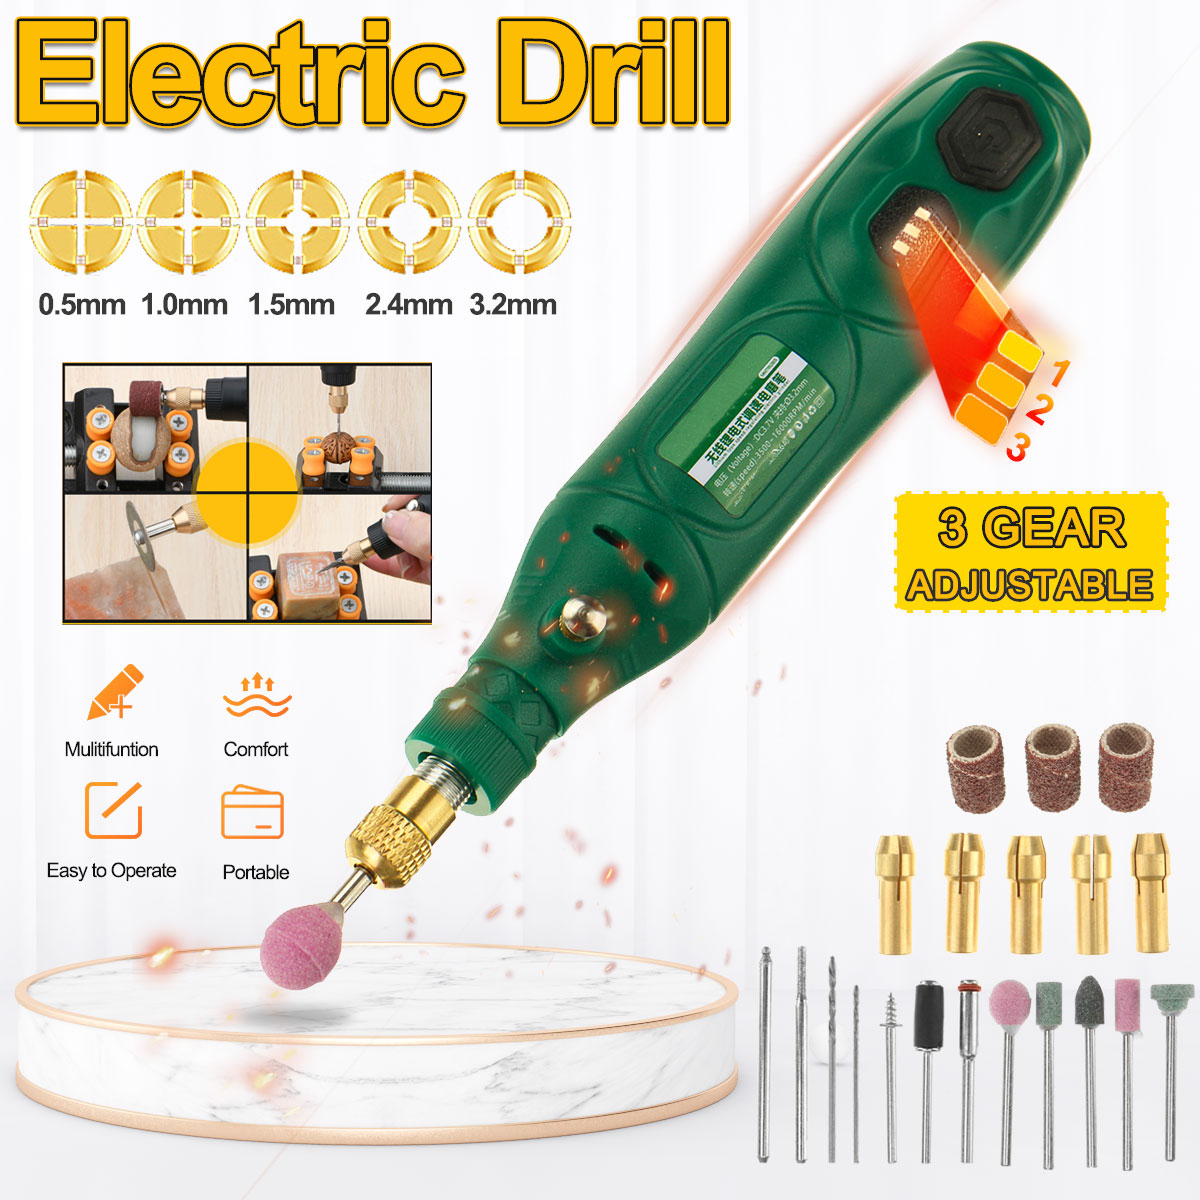 3-Speeds-USB-Rechargeable-Electric-Rotary-Tool-Drill-Grinder-Set-Metal-Wood-Jewelry-Polishing-Engrav-1810530-2